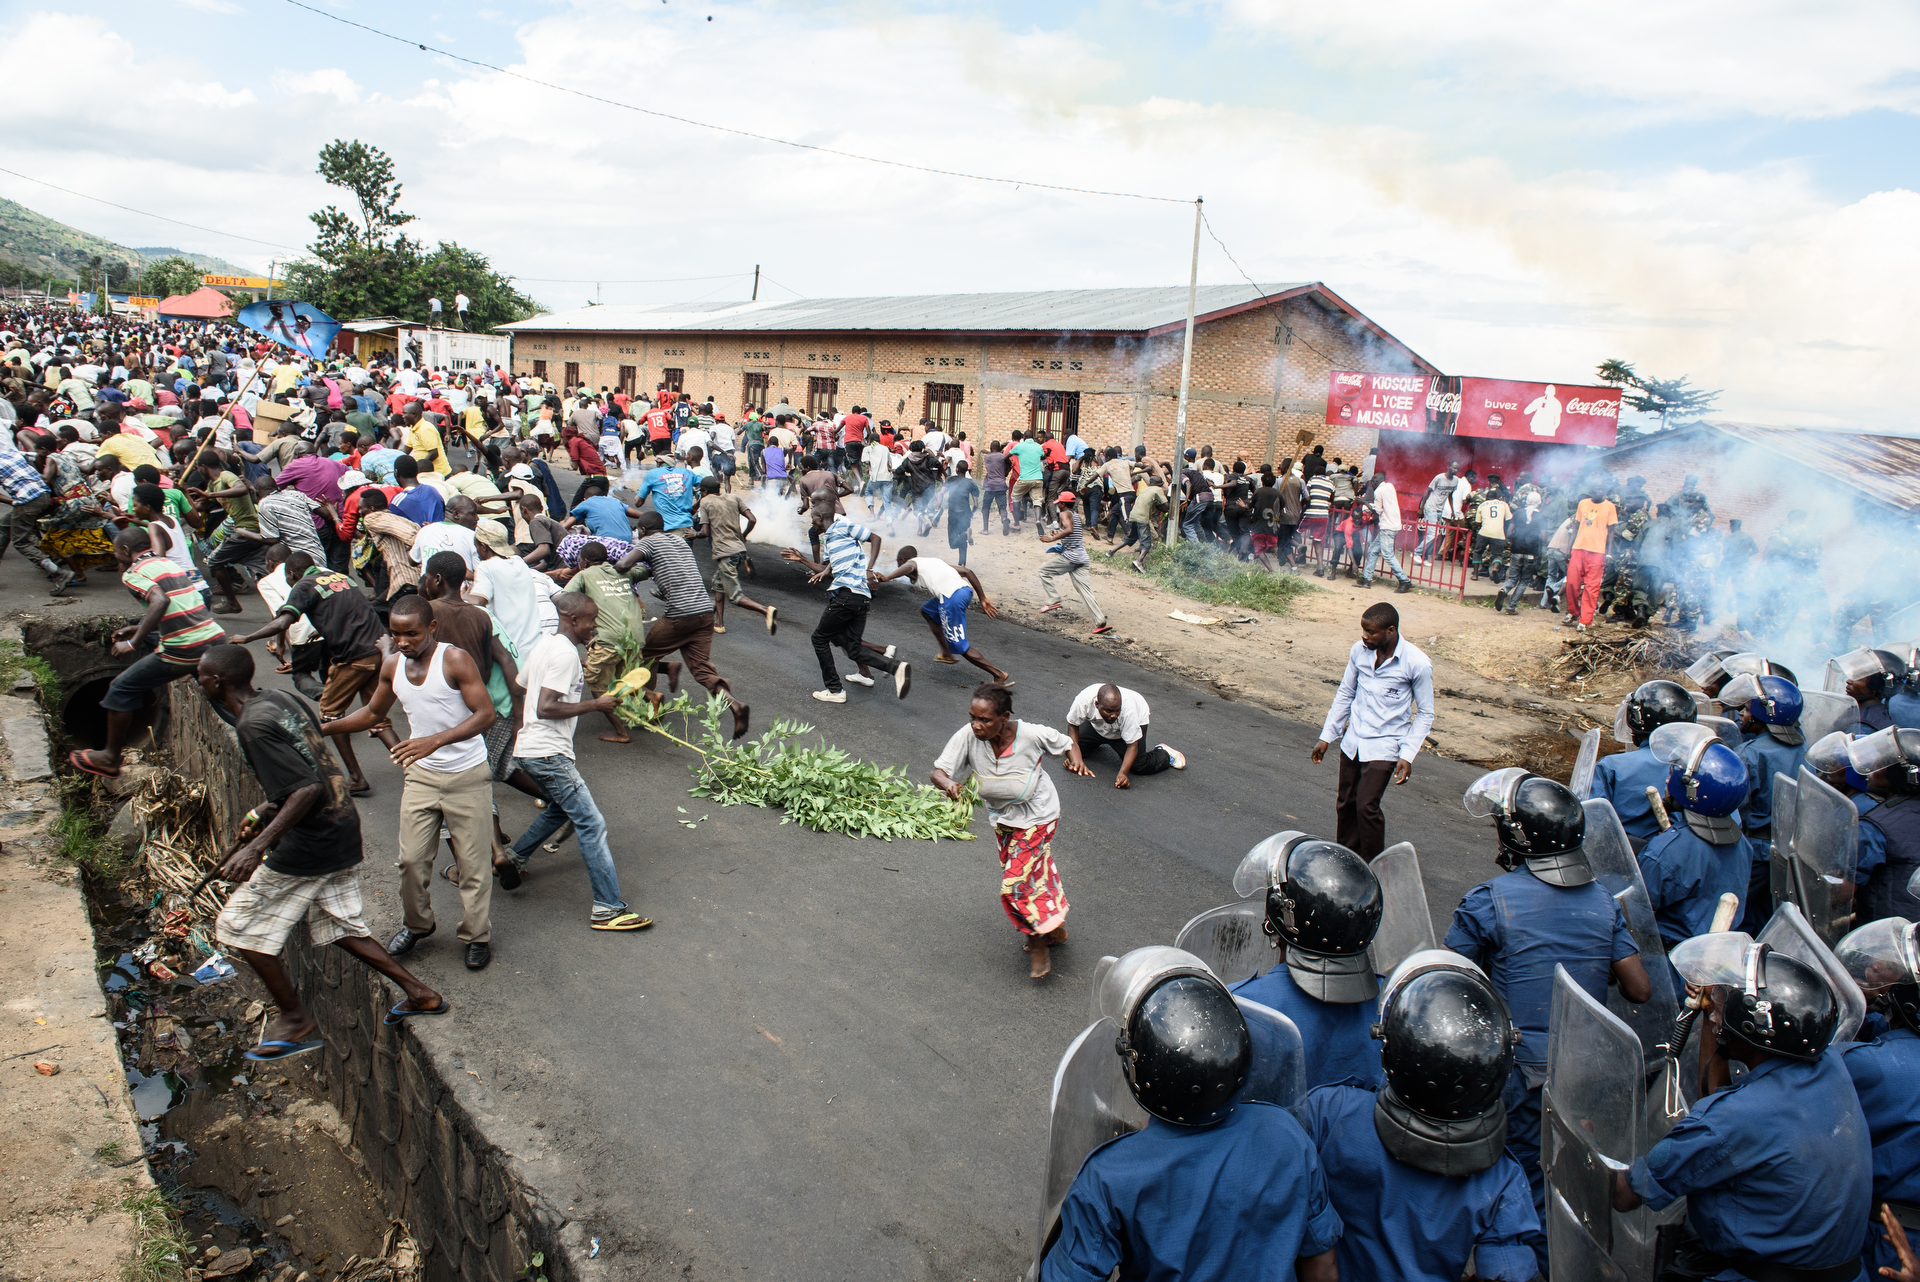  Protestors run from tear gas in Musaga on 13 May 2015 Demonstrations protesting incumbent president Pierre Nkurunziza's bid for a 3rd term continued in Bujumbura, Burundi on 13 May 2015. In the neighborhood of Musaga, hundreds of people waved sticks